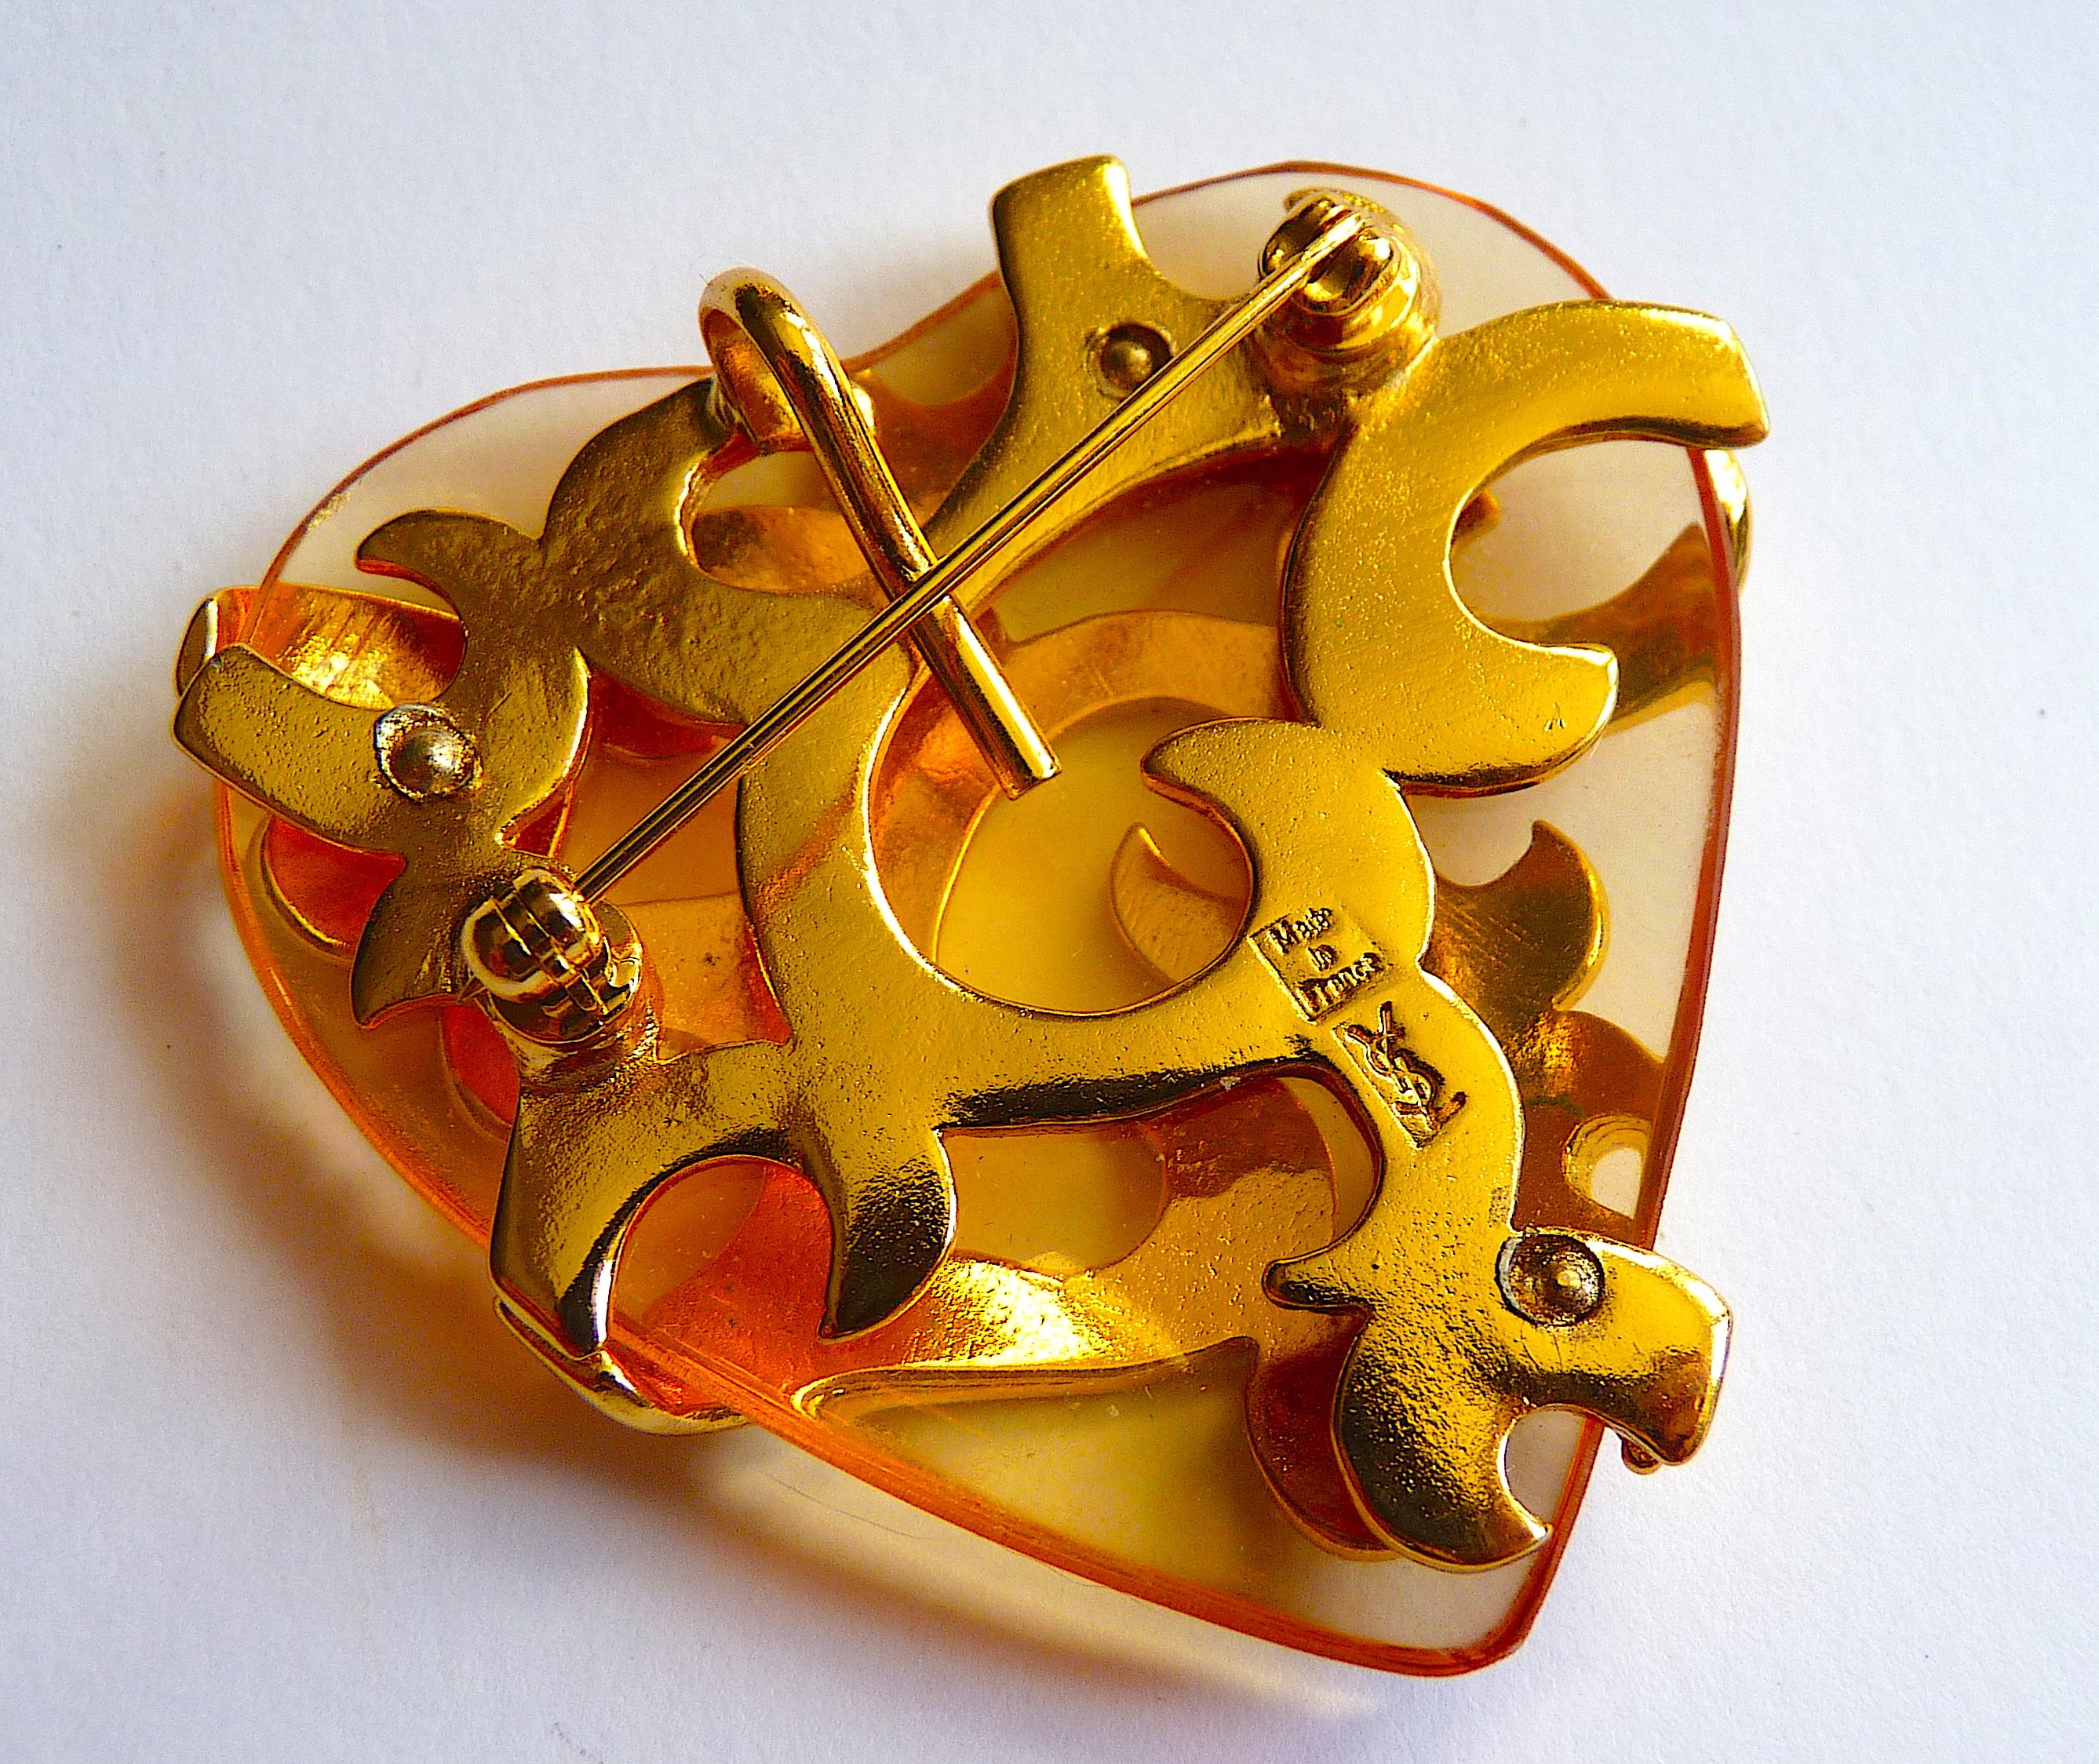 YSL by R. Goossens Gold Tone Metal and Clear Lucite Heart Brooch In Excellent Condition For Sale In CHAMPEAUX-SUR-SARTHE, FR